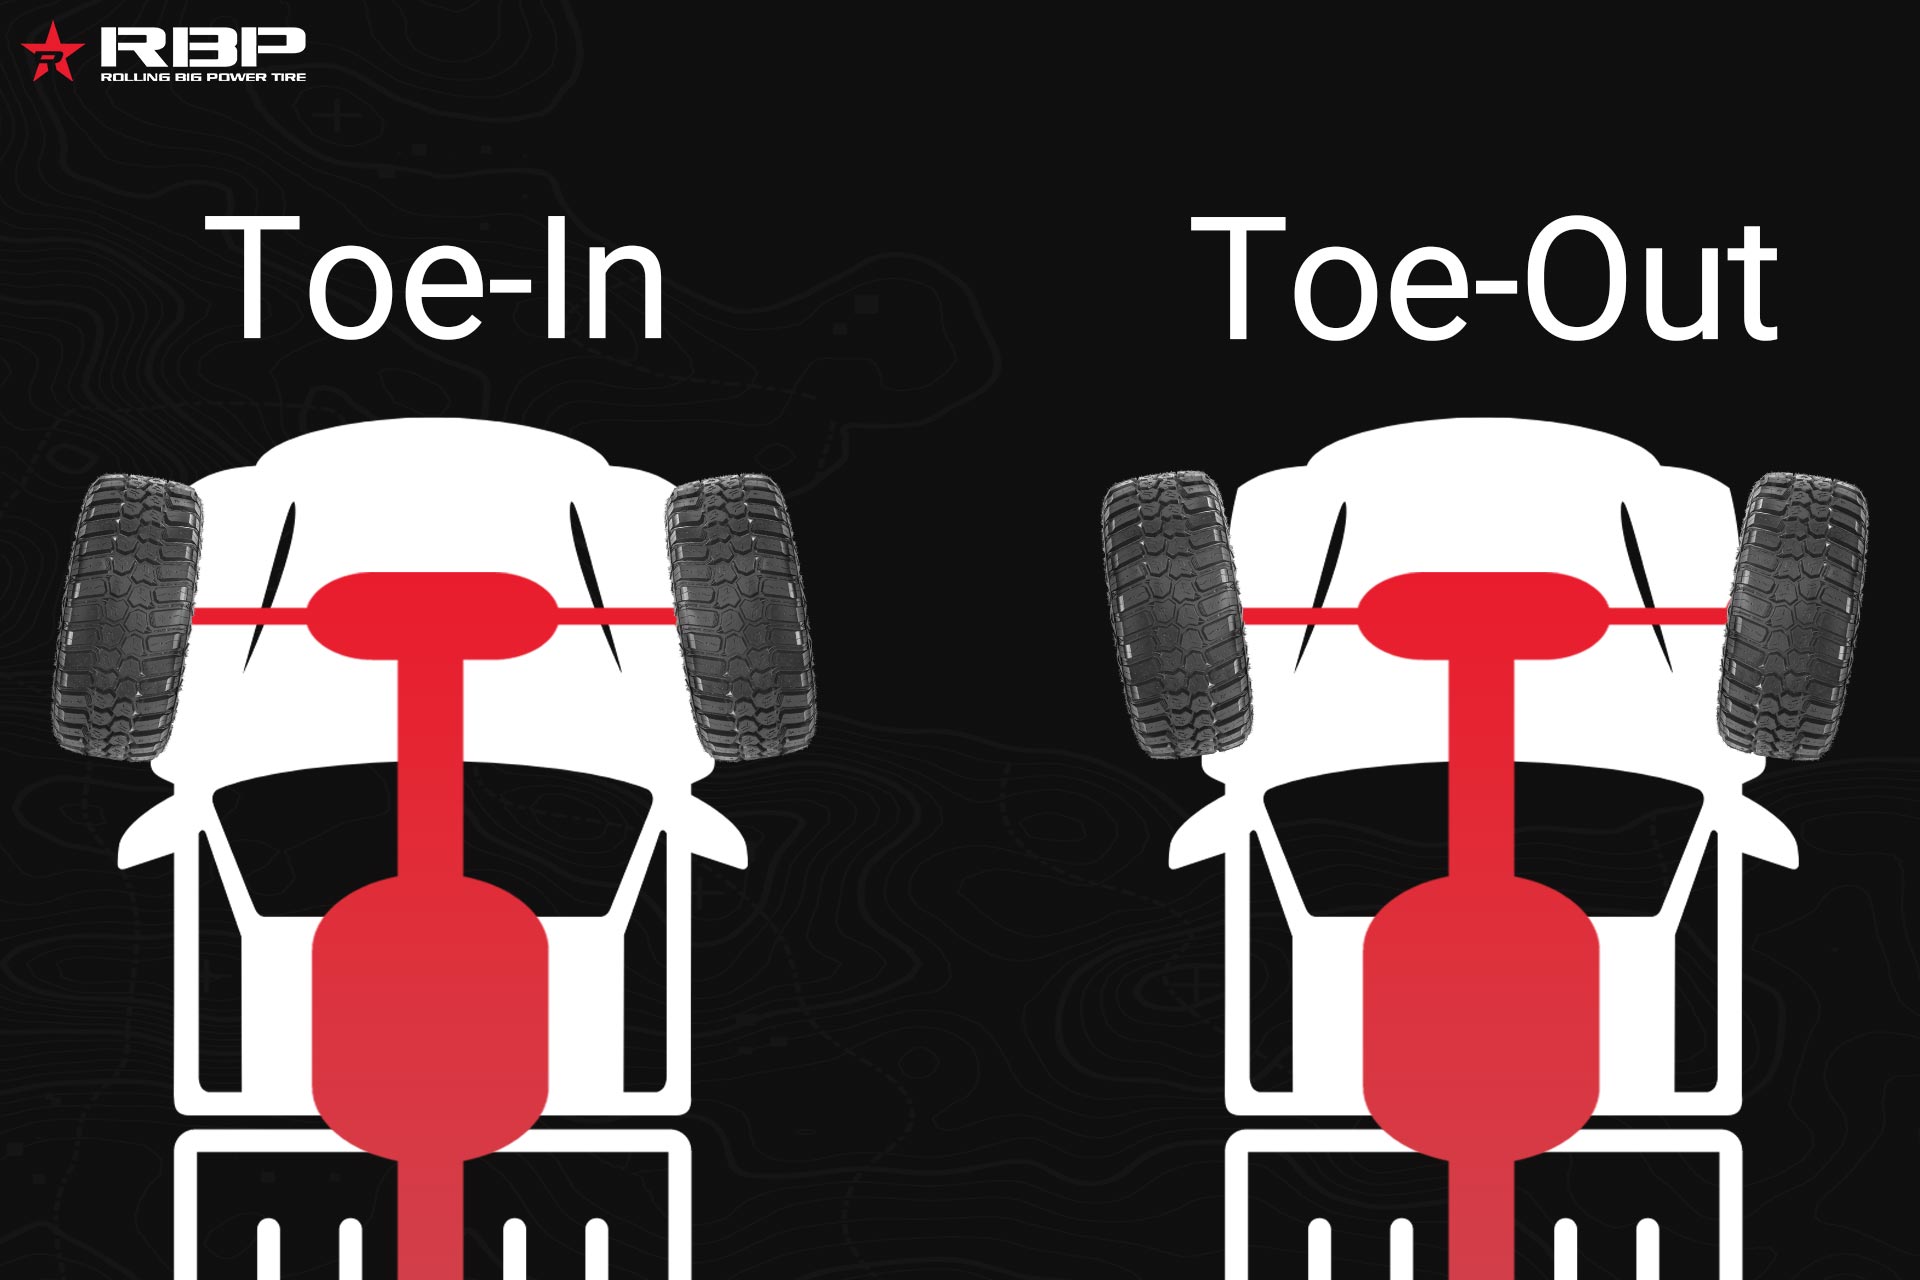 illustration of off-road tires with toe-in and toe-out alignment